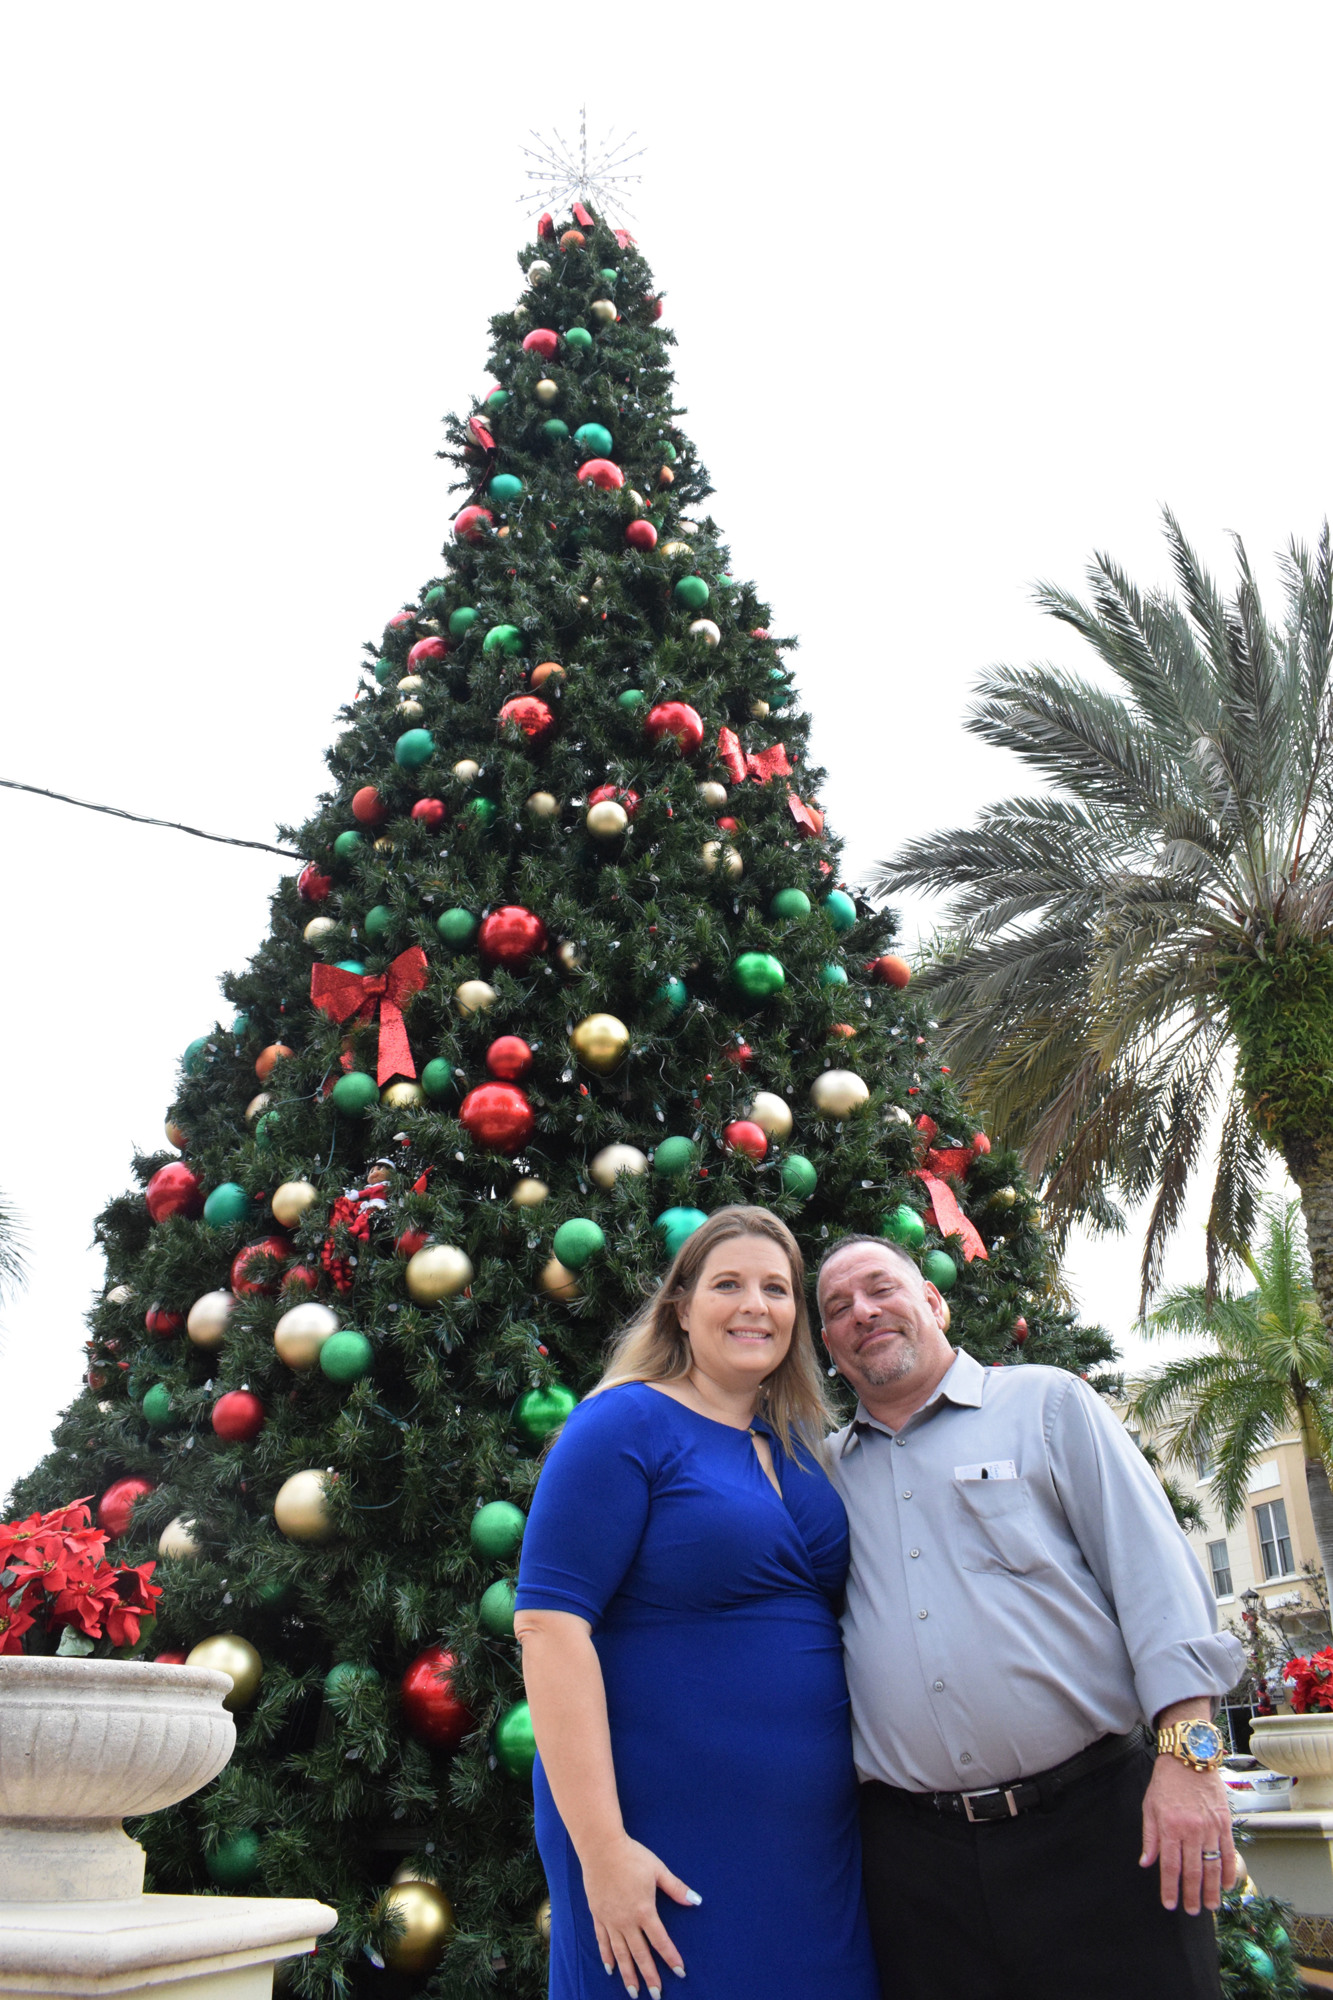 The Christmas tree on Main Street at Lakewood Ranch provides a beautiful place for Greenbrook's Crystal Avery and Marty Satz to have a small intimate wedding.